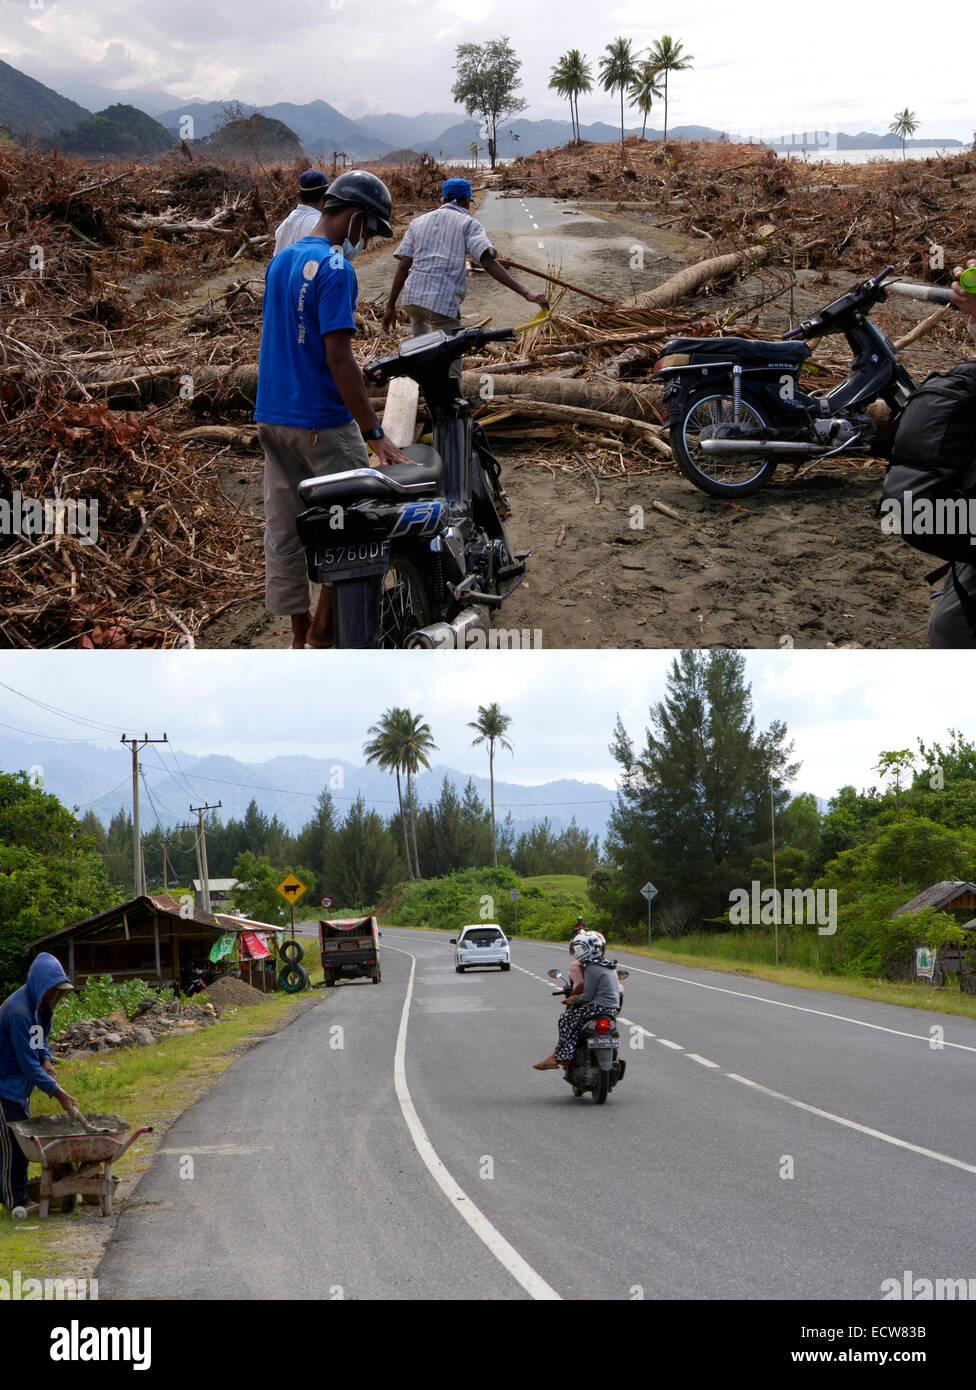 In this composite image a comparison has been made between a scene in 2005 (TOP) and 2014 (BOTTOM) ***TOP IMAGE*** LEUPUNG, ACEH, INDONESIA - JANUARY 8: Men prepare to move motorbikes over trees after the Tsunami in Leupung, Aceh, Indonesia -150 miles from southern Asia's massive earthquake's epicenter on Tuesday January 8 2005.  Leaping, Aceh, Indonesia.  ***BOTTOM IMAGE*** LEUPUNG, ACEH, INDONESIA - DECEMBER 13: Motorbikes ride down the road prior to the ten year anniversary of the 2004 earthquake and tsunami on December 13, 2014 in Leupung, Aceh, Indonesia. Aceh was the worst hit location,  Stock Photo